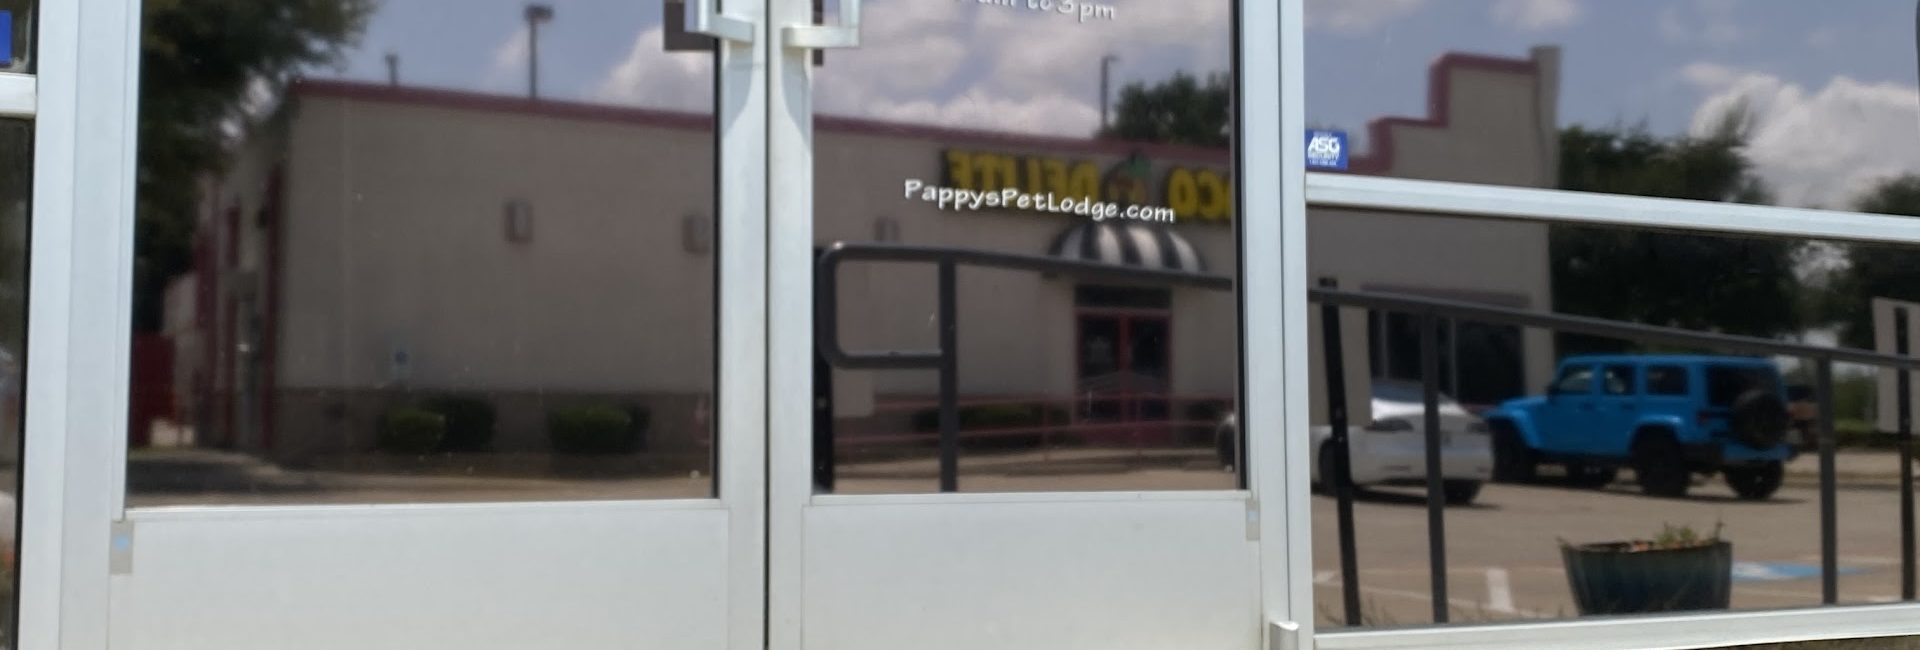 Pappy’s Pet Lodge – N. Plano 2